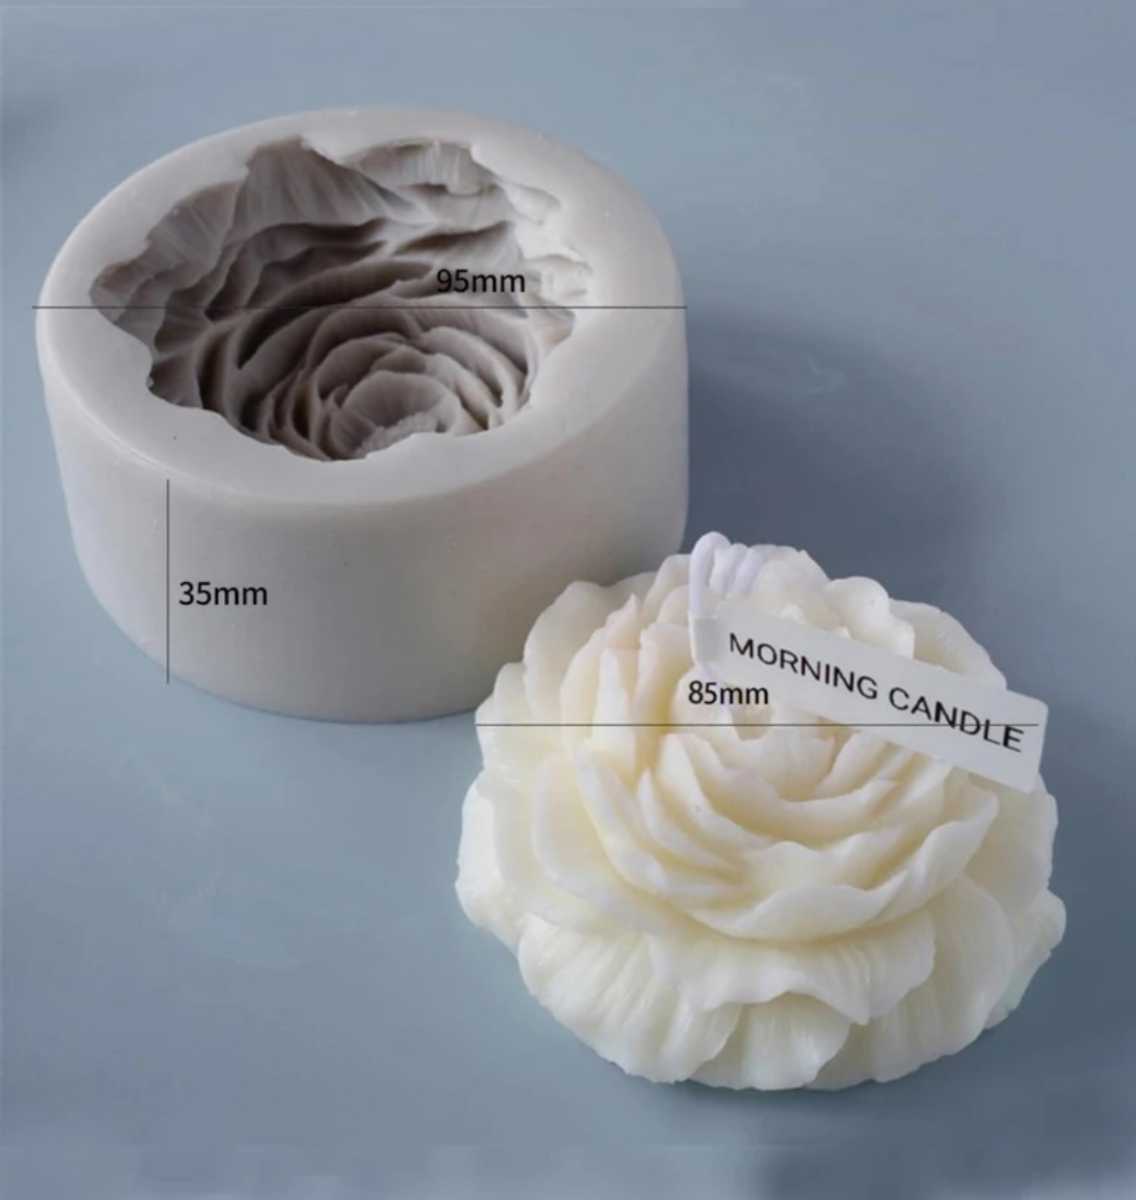  silicon mold rose candle candle type candle mold aroma Stone .... rose flower type mold solid Korea 